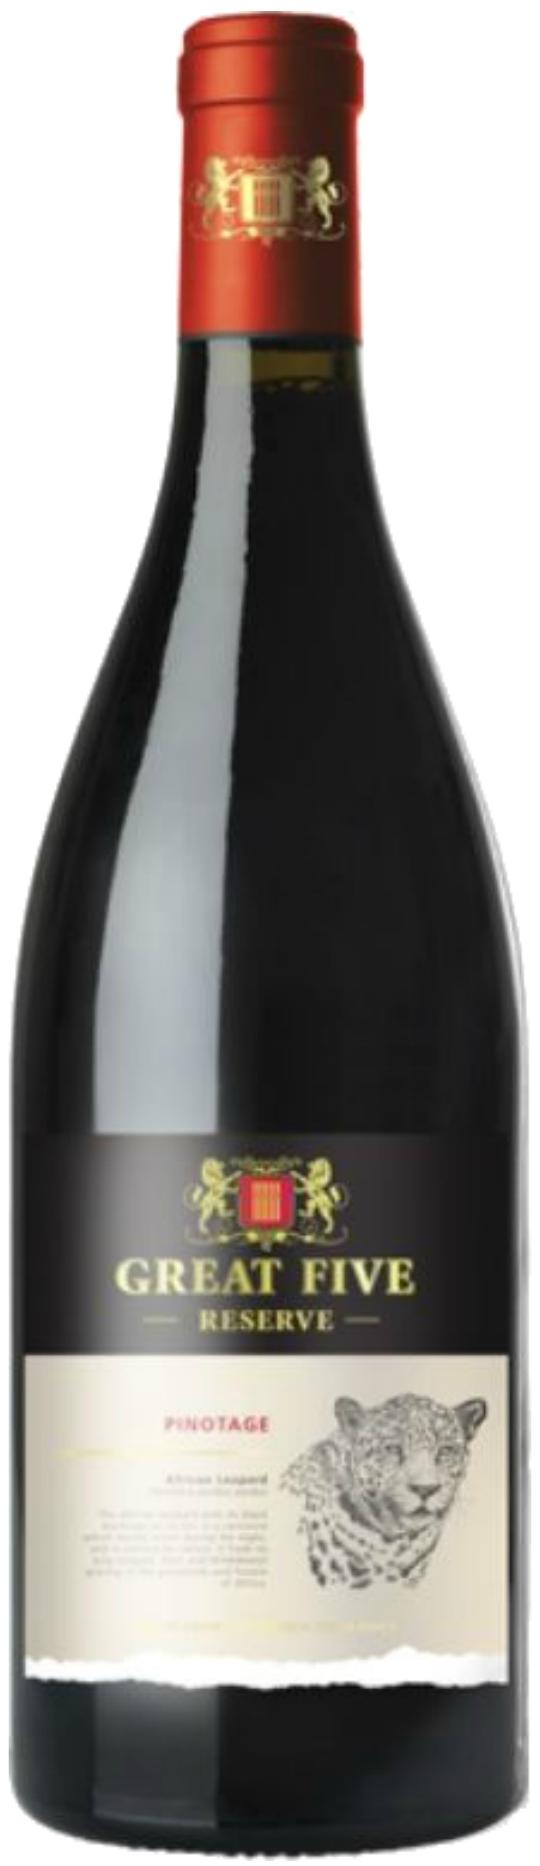 | Südafrika, Curry Premium Great Stellenview Reserve (Rotwein, Cape) Five oHG Pinotage Western Wines